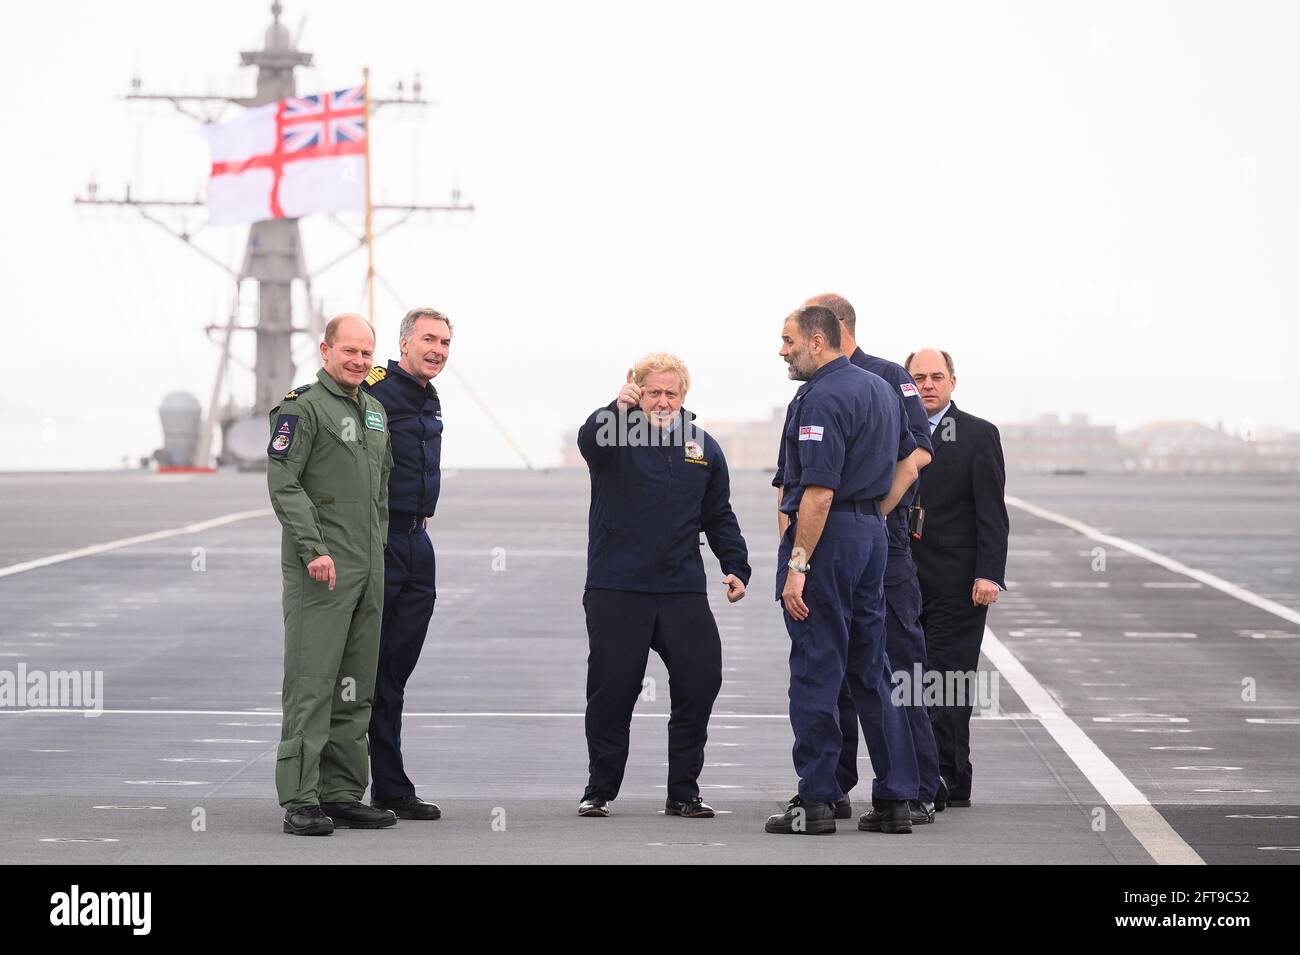 (Left to right) Air Chief Marshal Sir Mike Wigston, First Sea Lord Admiral Tony Radakin, Prime Minister Boris Johnson, Commodore Steve Moorhouse, Captain Angus Essenhigh and Defence Secretary Ben Wallace face strong winds as they walk on the flight deck, during a visit aboard HMS Queen Elizabeth in Portsmouth ahead of its first operational deployment to the Far East. Picture date: Friday May 21, 2021. Stock Photo